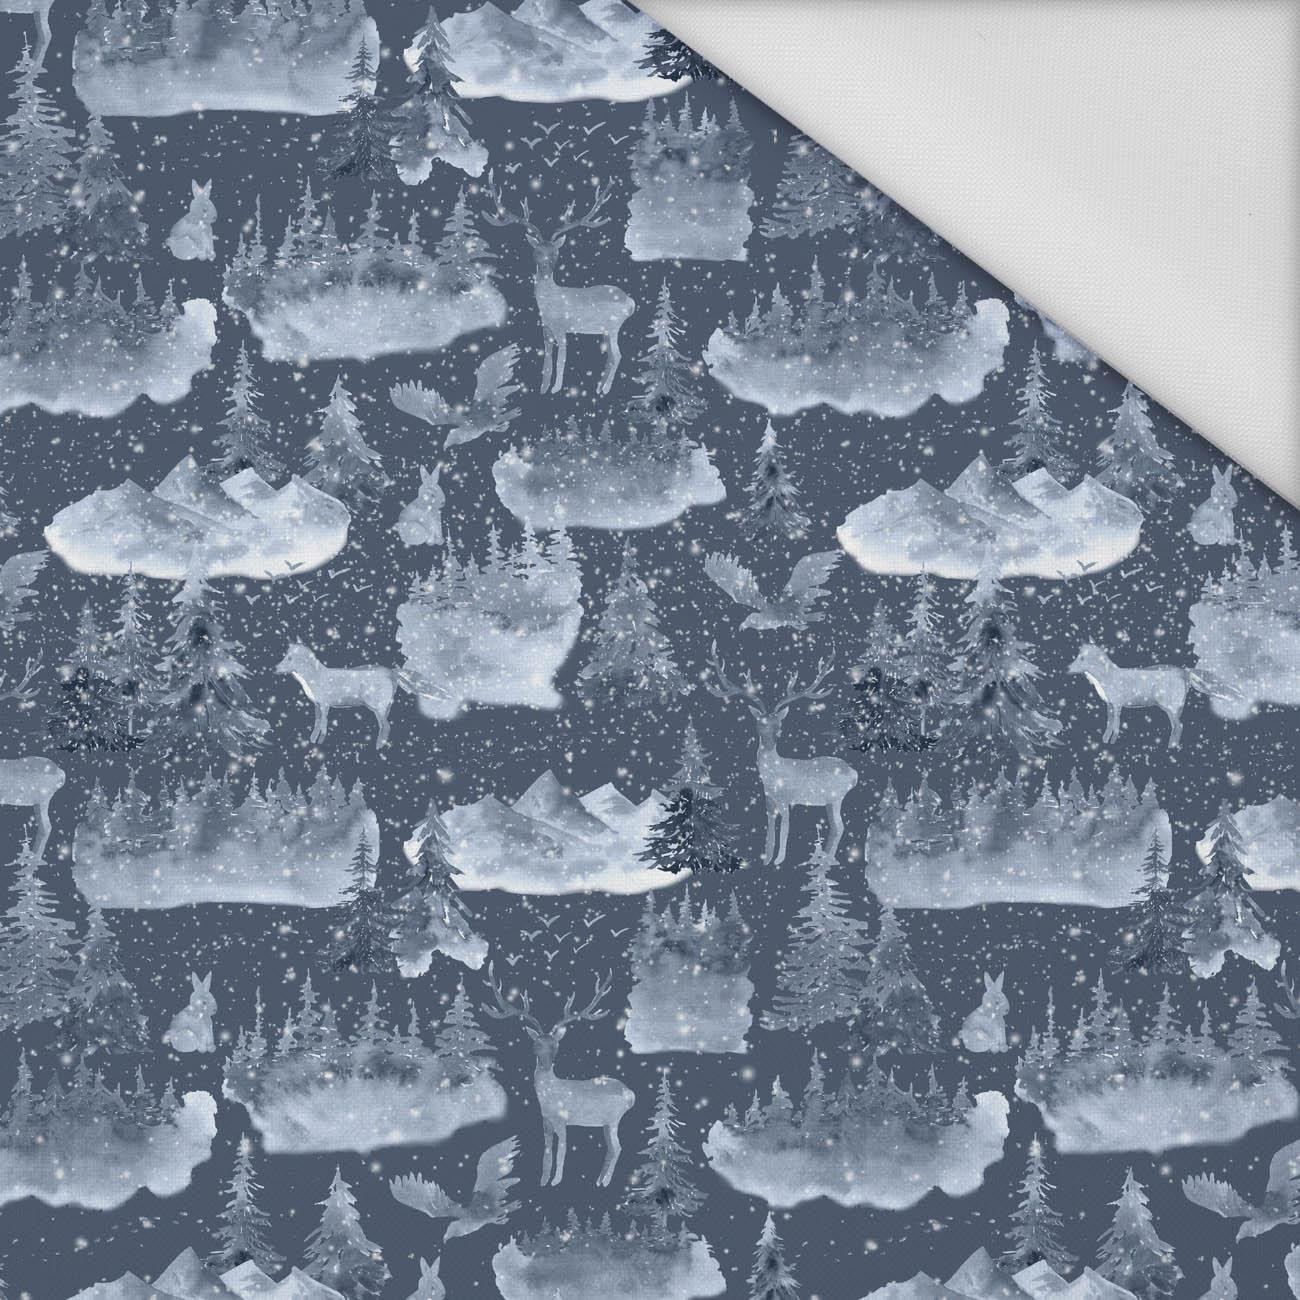 ANIMALS IN THE FOREST PAT. 2 (PAINTED FOREST) - Waterproof woven fabric